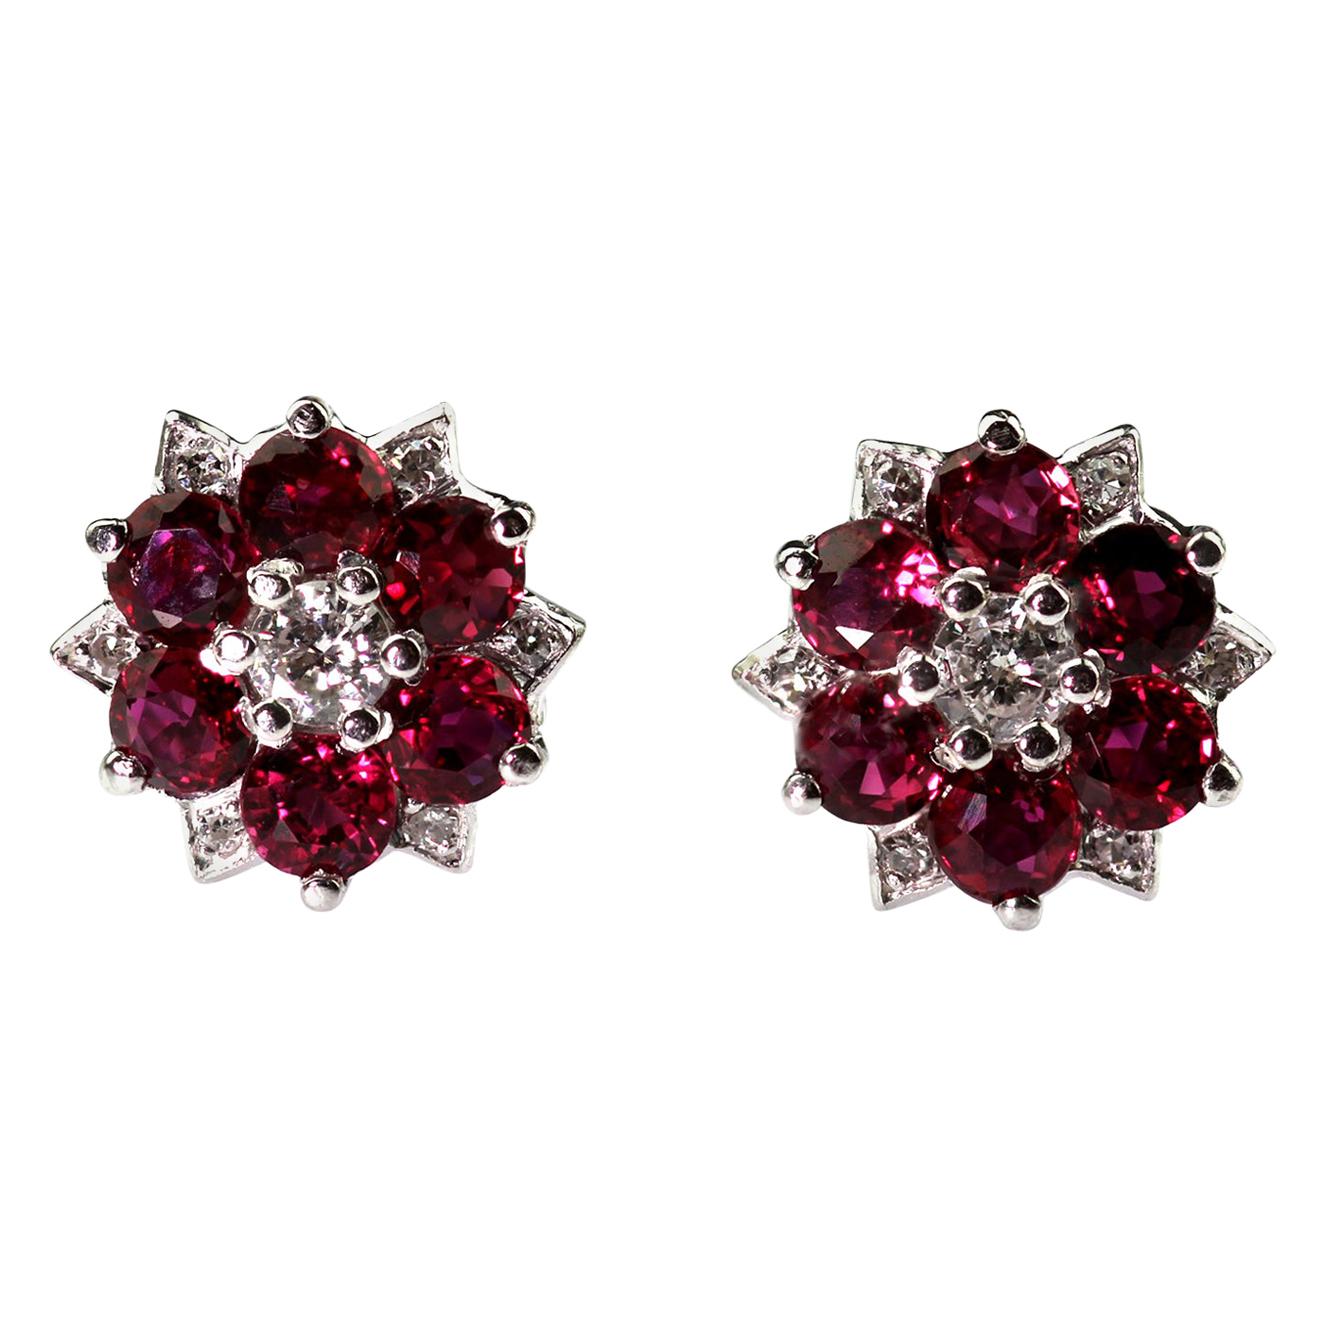 Retro Ruby and Diamond Cluster Earrings, 18 Carat White Gold, Pin and Push On